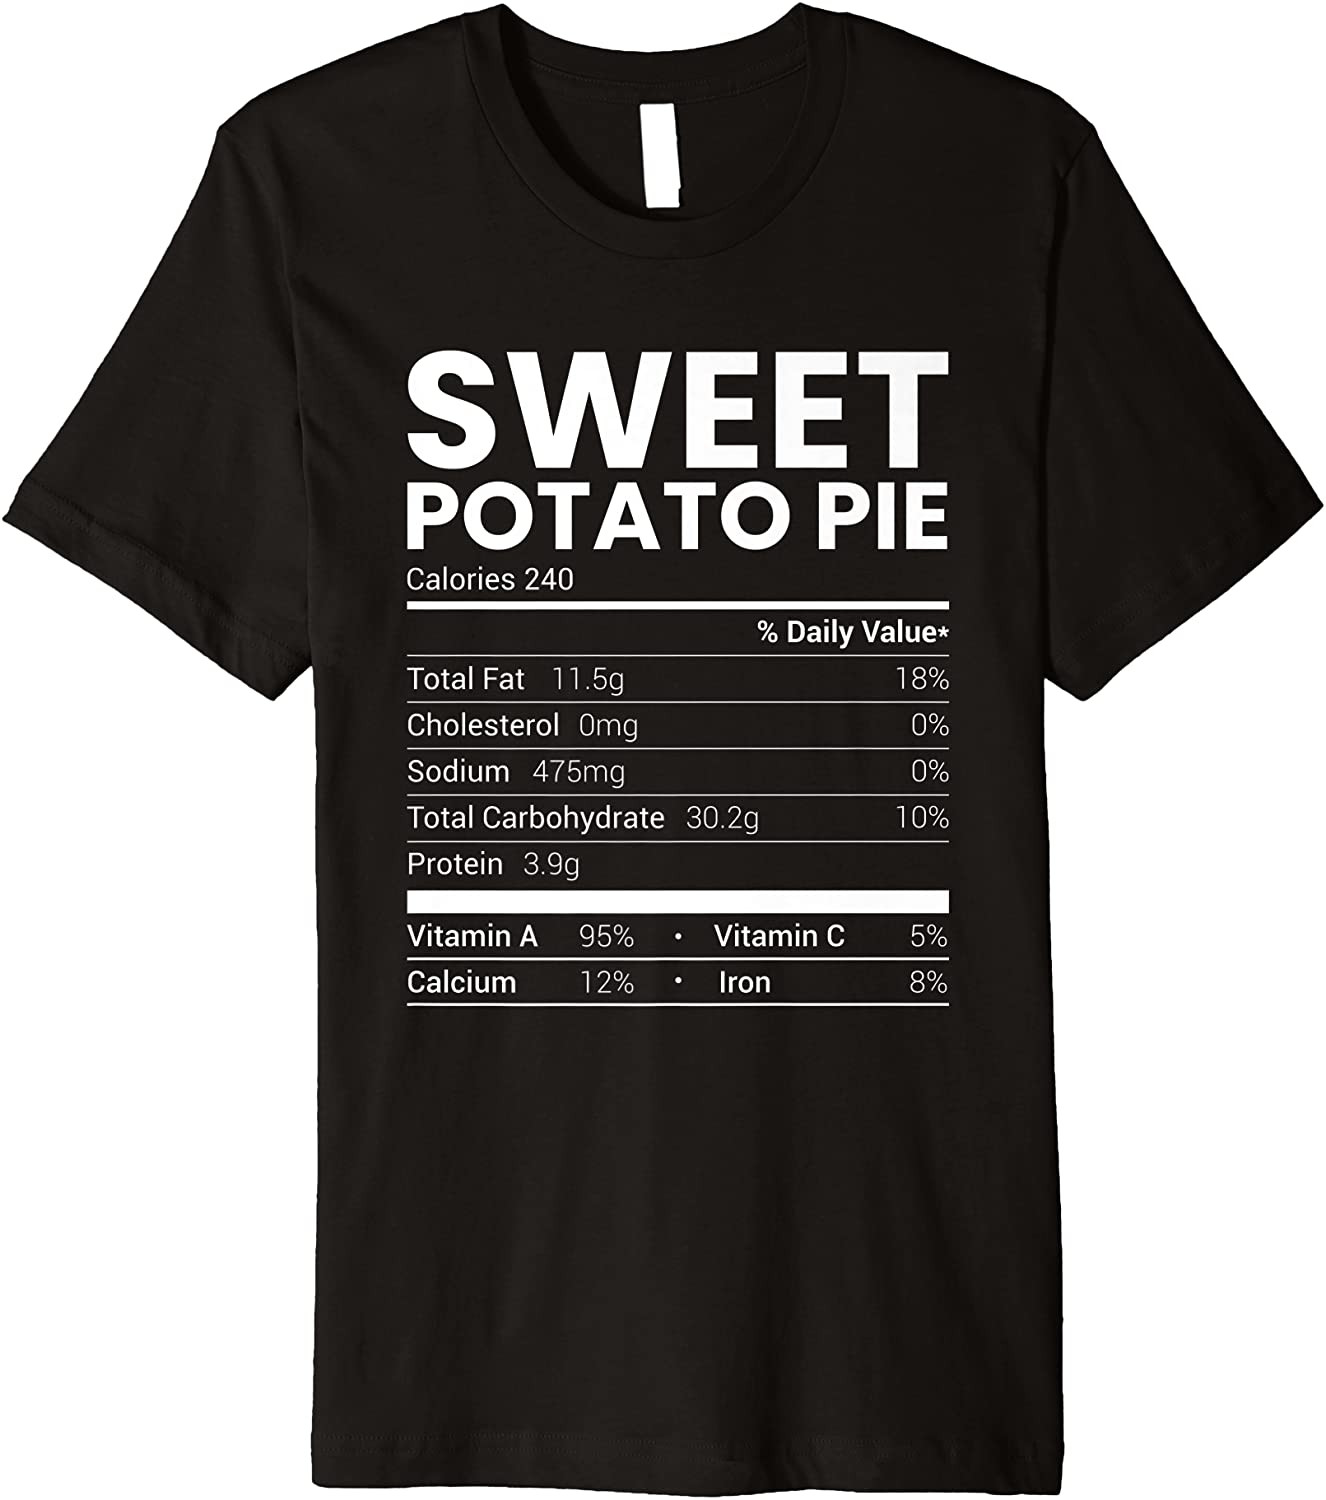 Sweet Potato Pie Nutrition Facts 2021 Thanksgiving Food T-Shirt